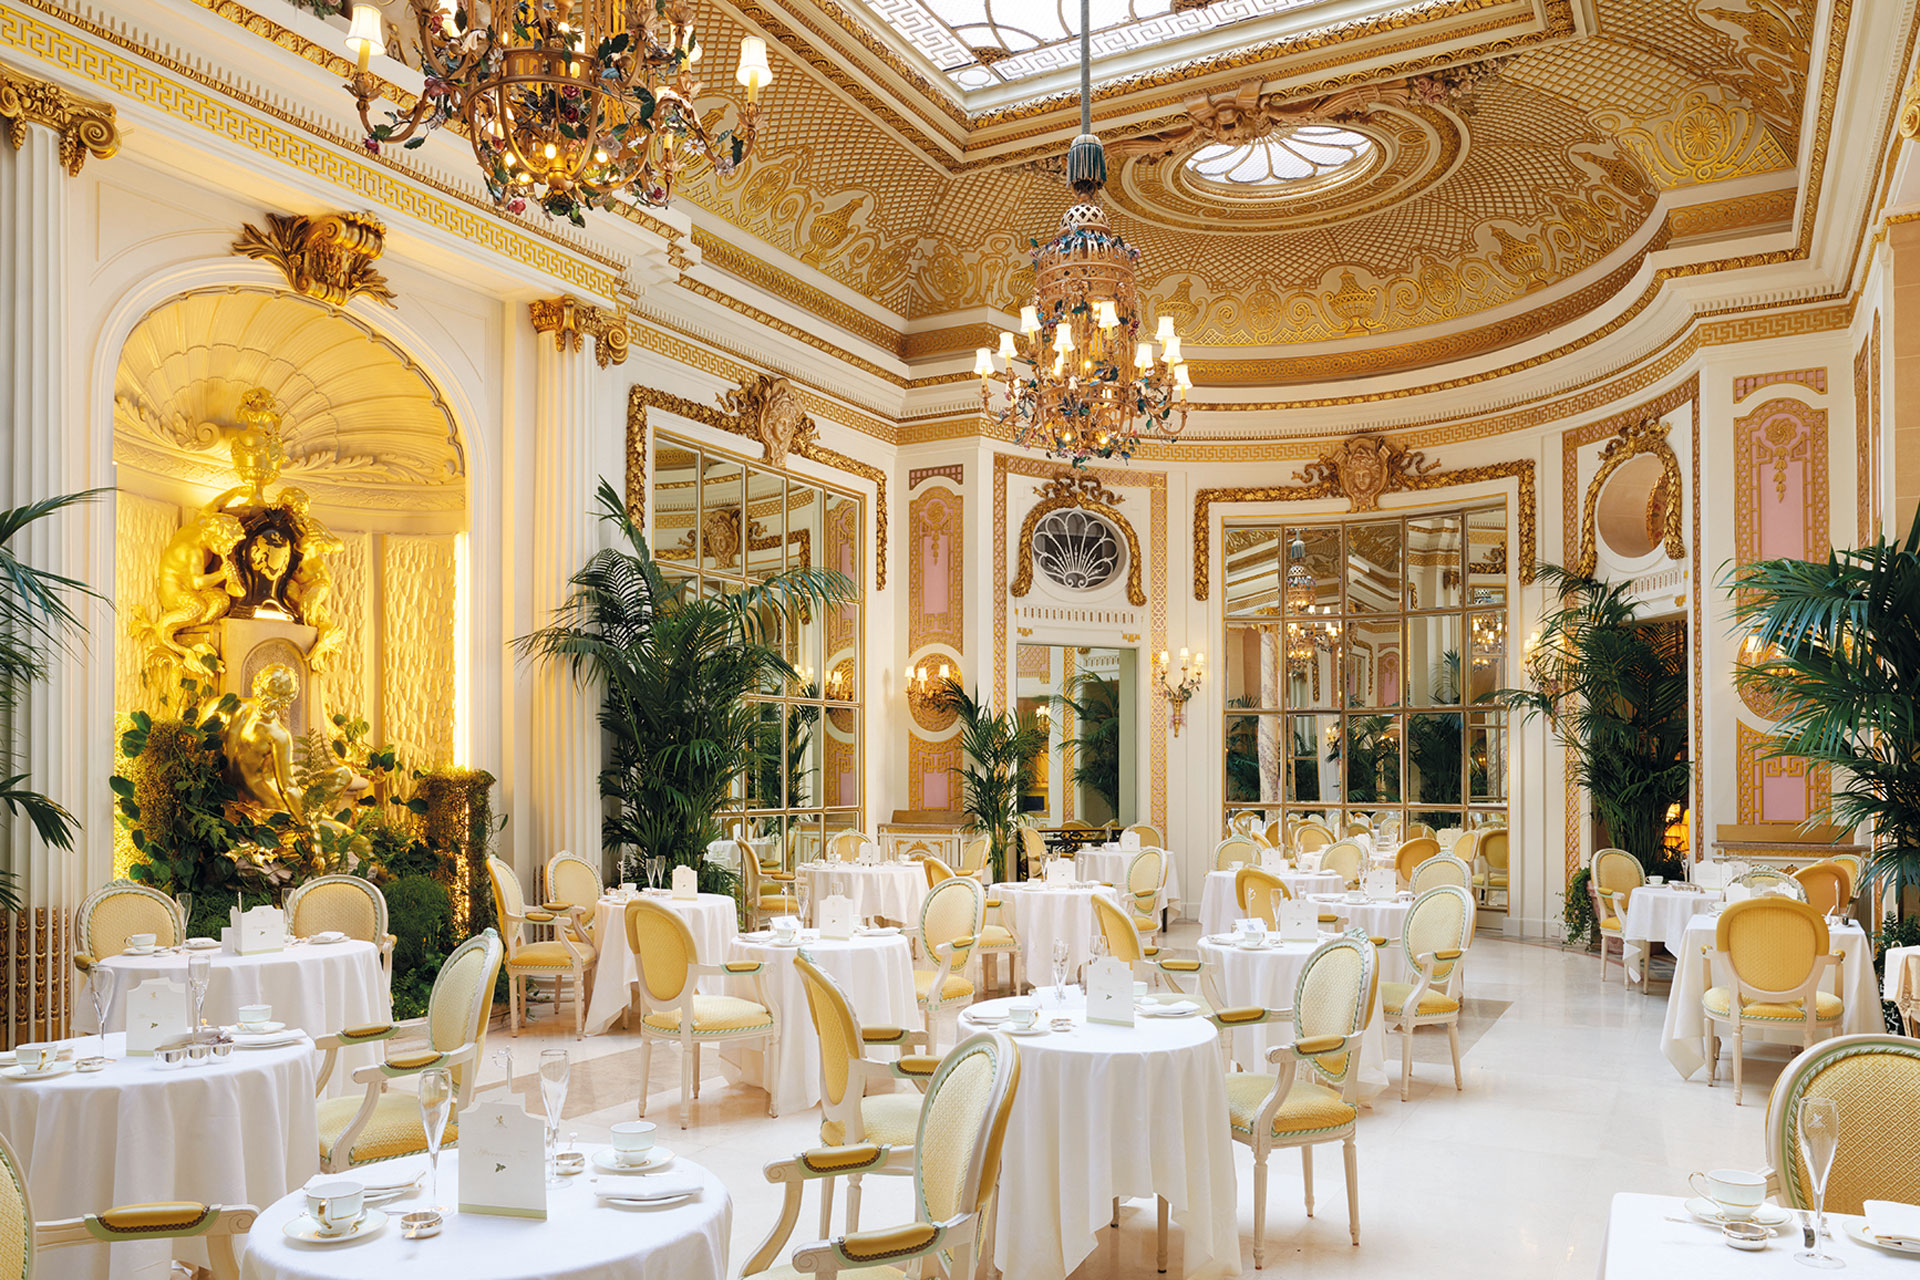 Afternoon Tea at The Ritz: What To Expect